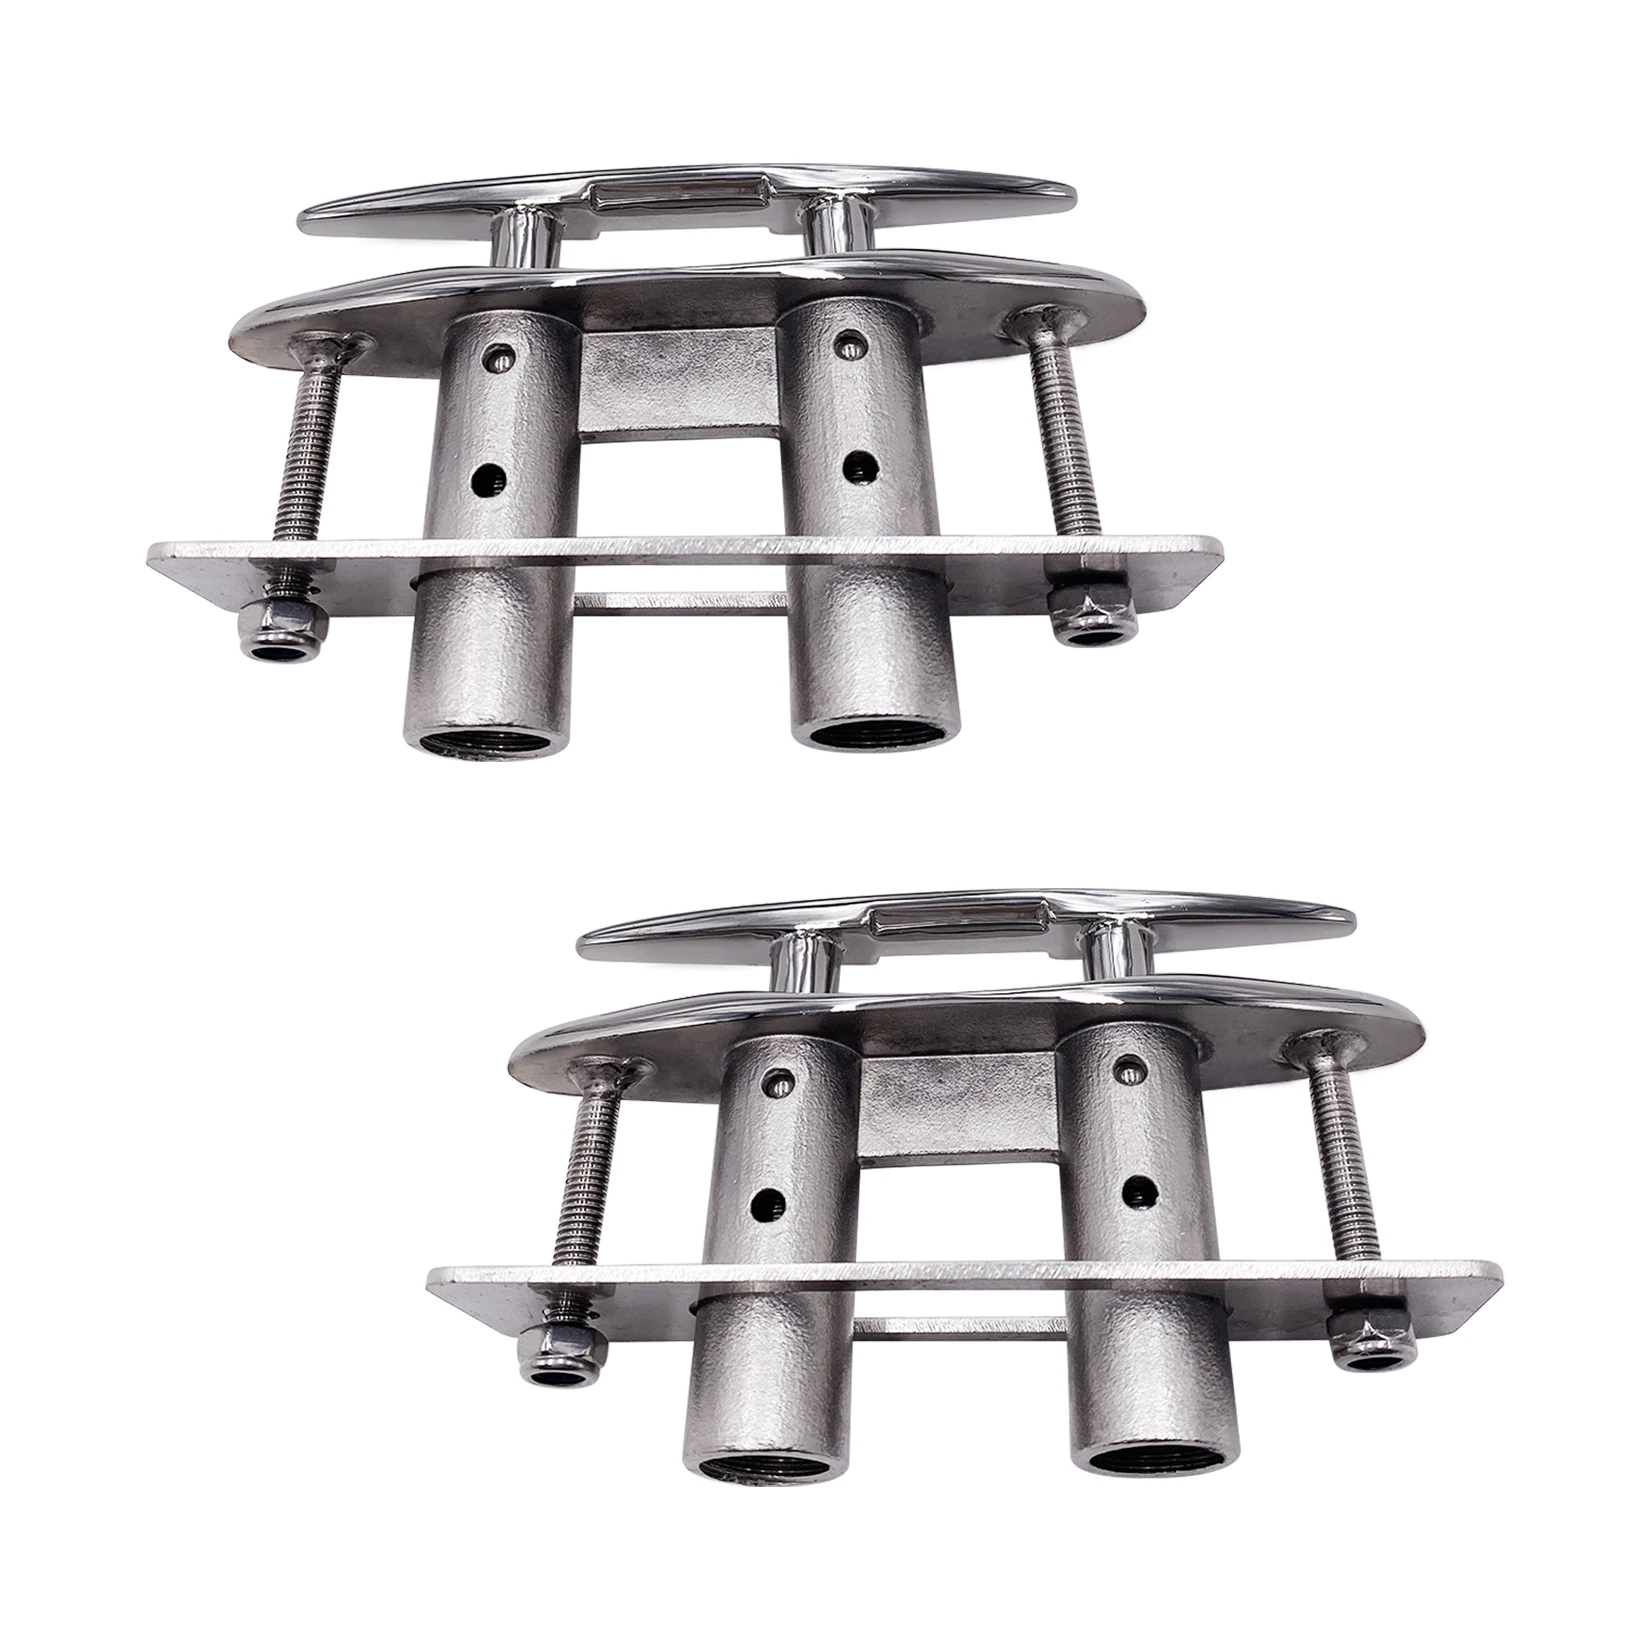 2 Pcs 5 inch Boat Pull Up Cleat Marine Docking Stainless Steel 316 Pop Up Cleat Flush Mount Dock Retractable Cleat